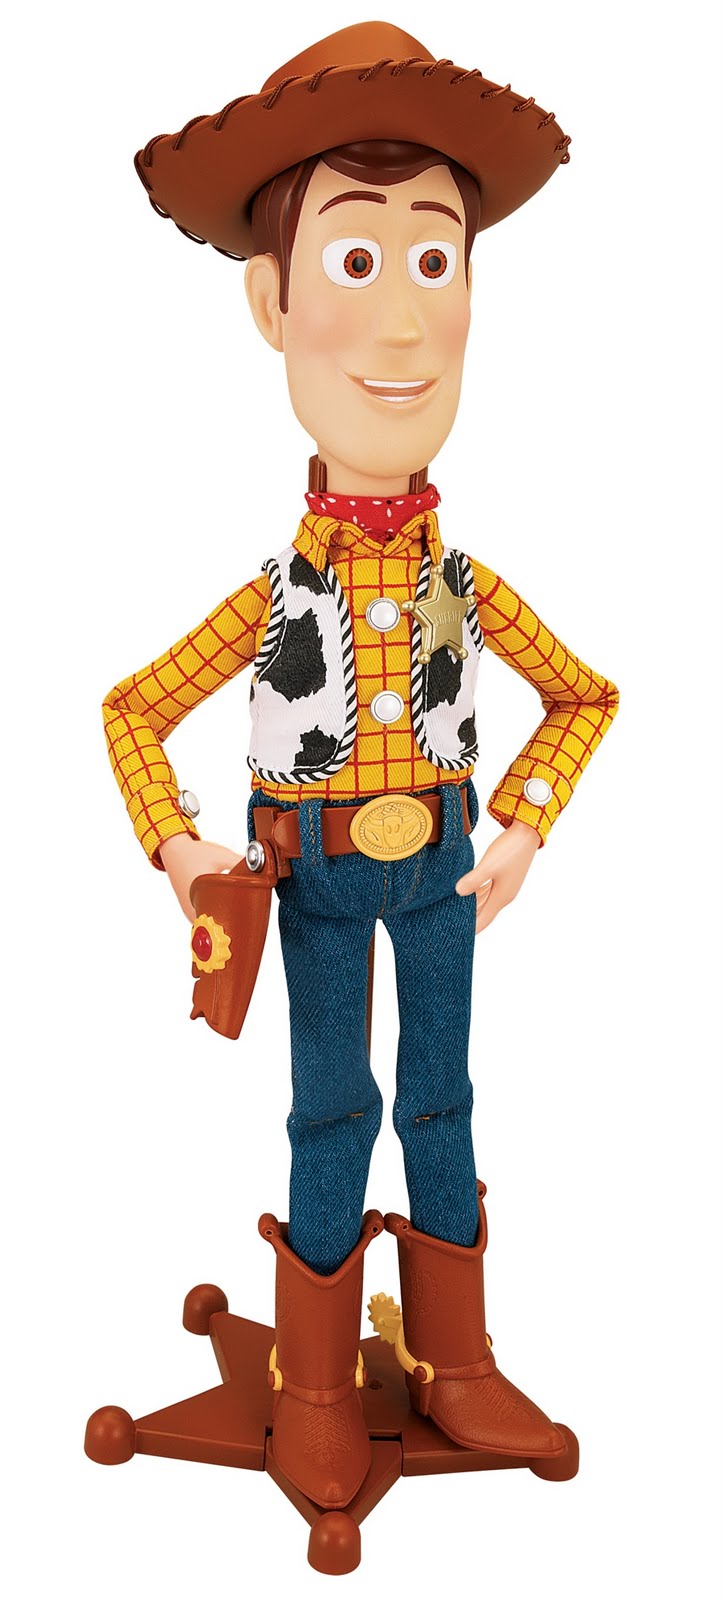 Pictures Of Woody From Toy Story 5